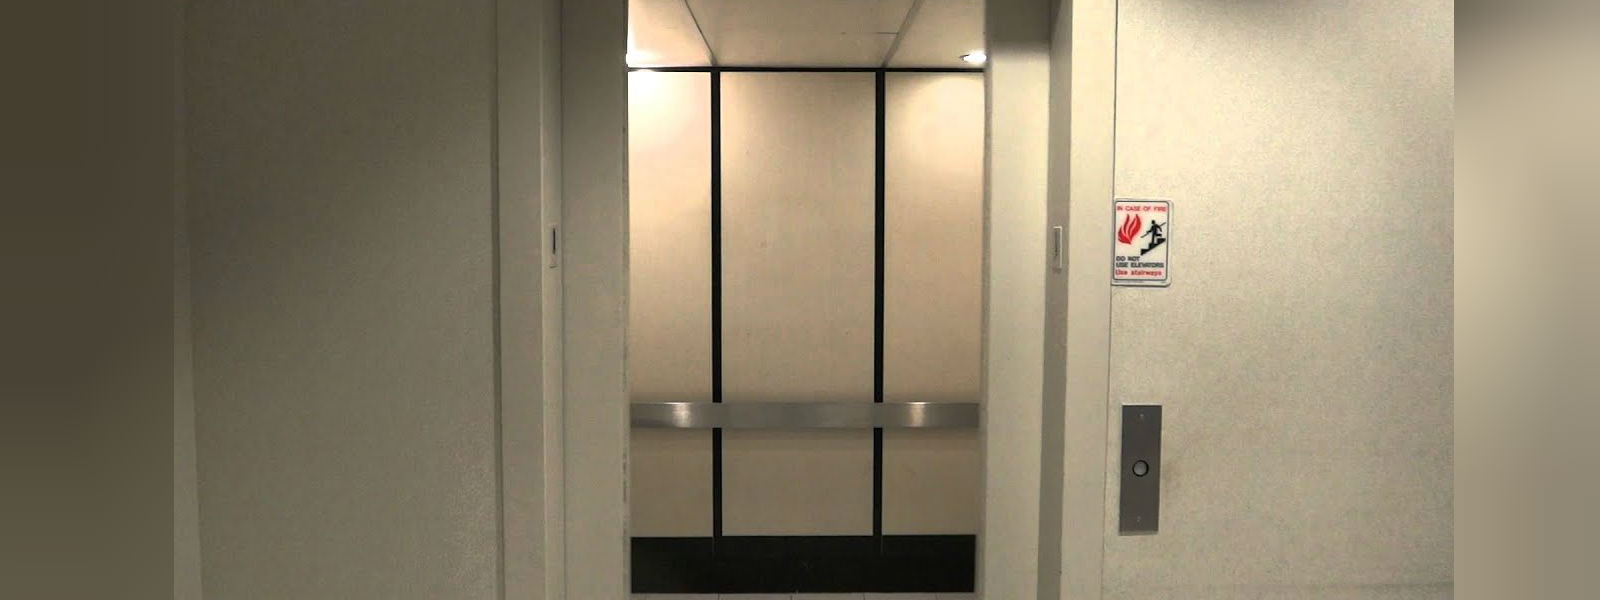  A special investigation to examine the elevator